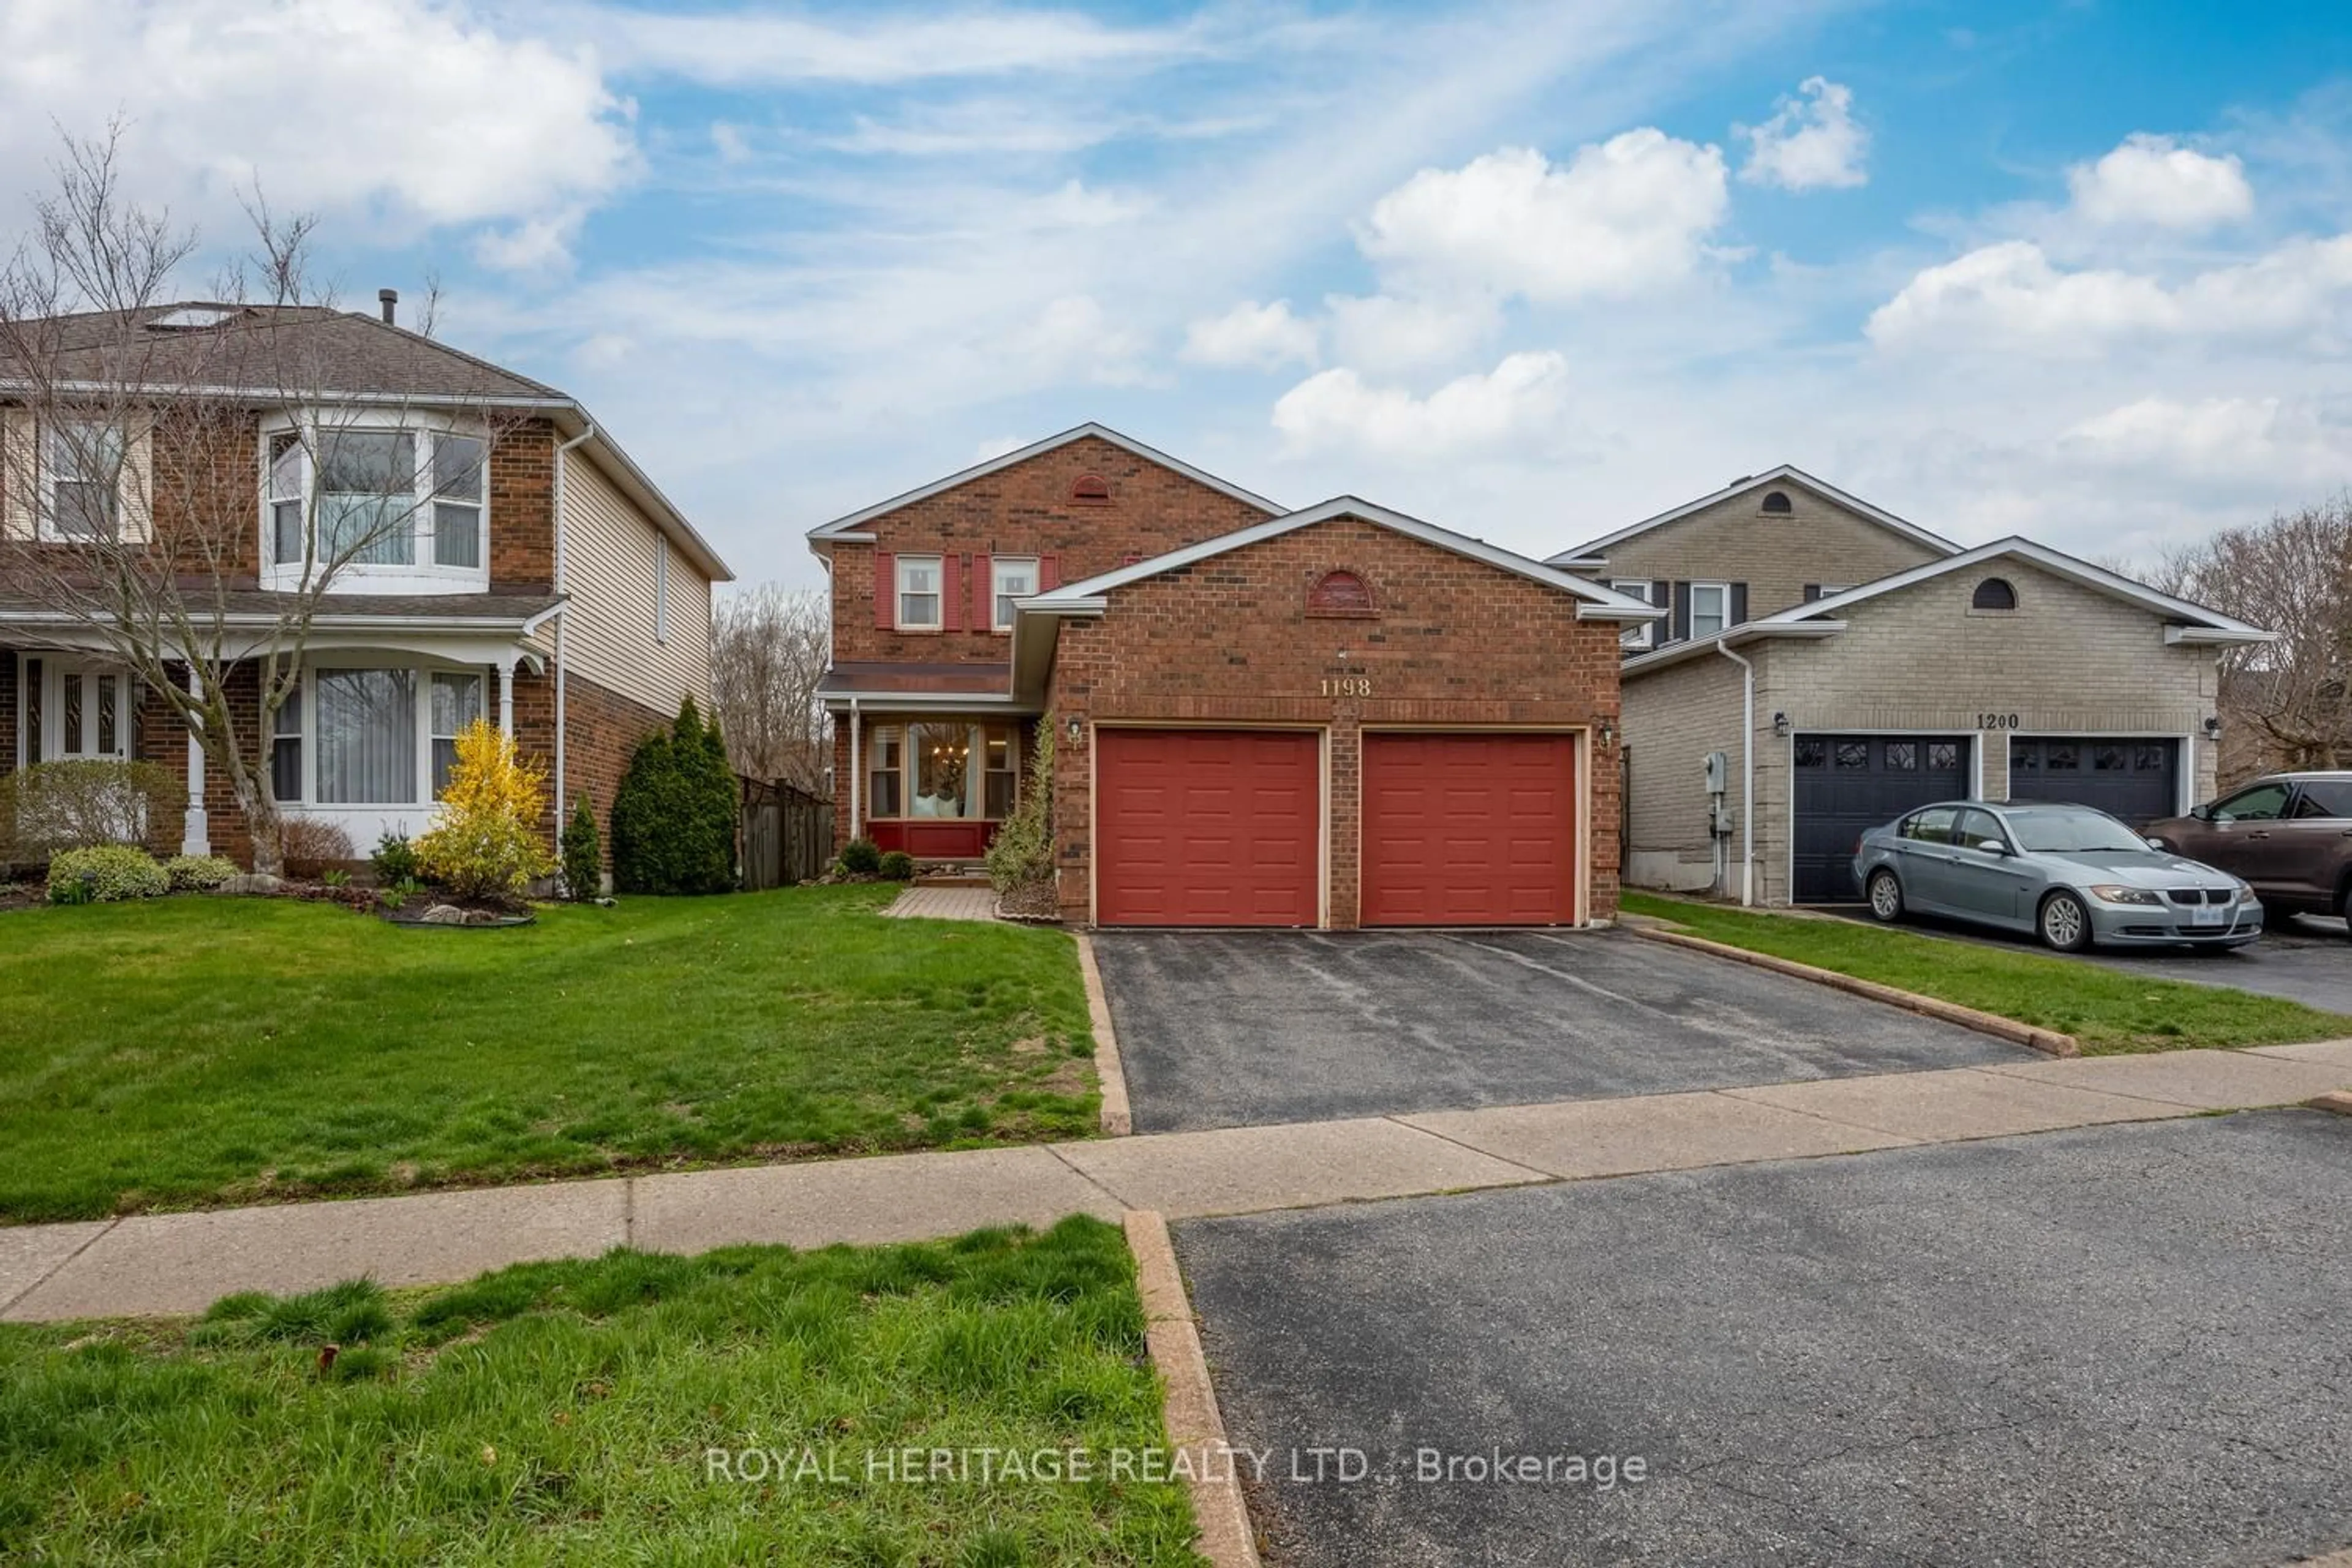 Frontside or backside of a home for 1198 Maple Gate Rd, Pickering Ontario L1X 1T6